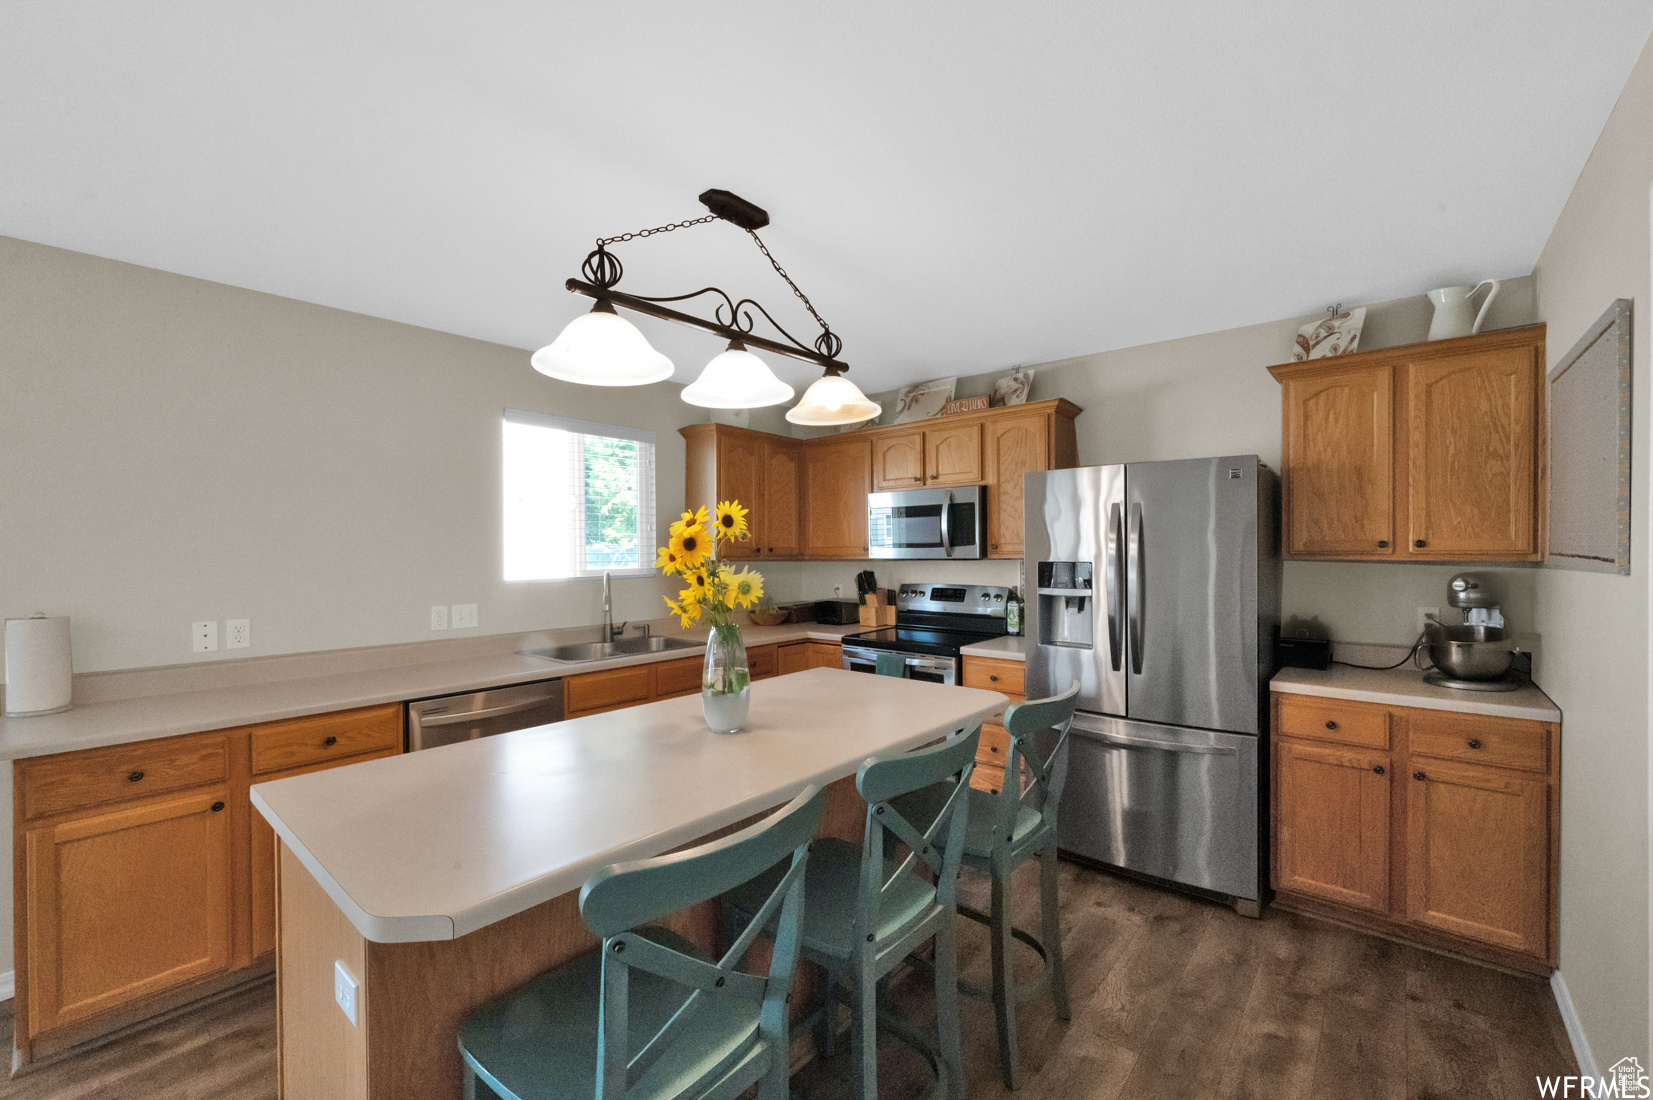 Kitchen with a center island, dark wood-type flooring, stainless steel appliances, and decorative light fixtures